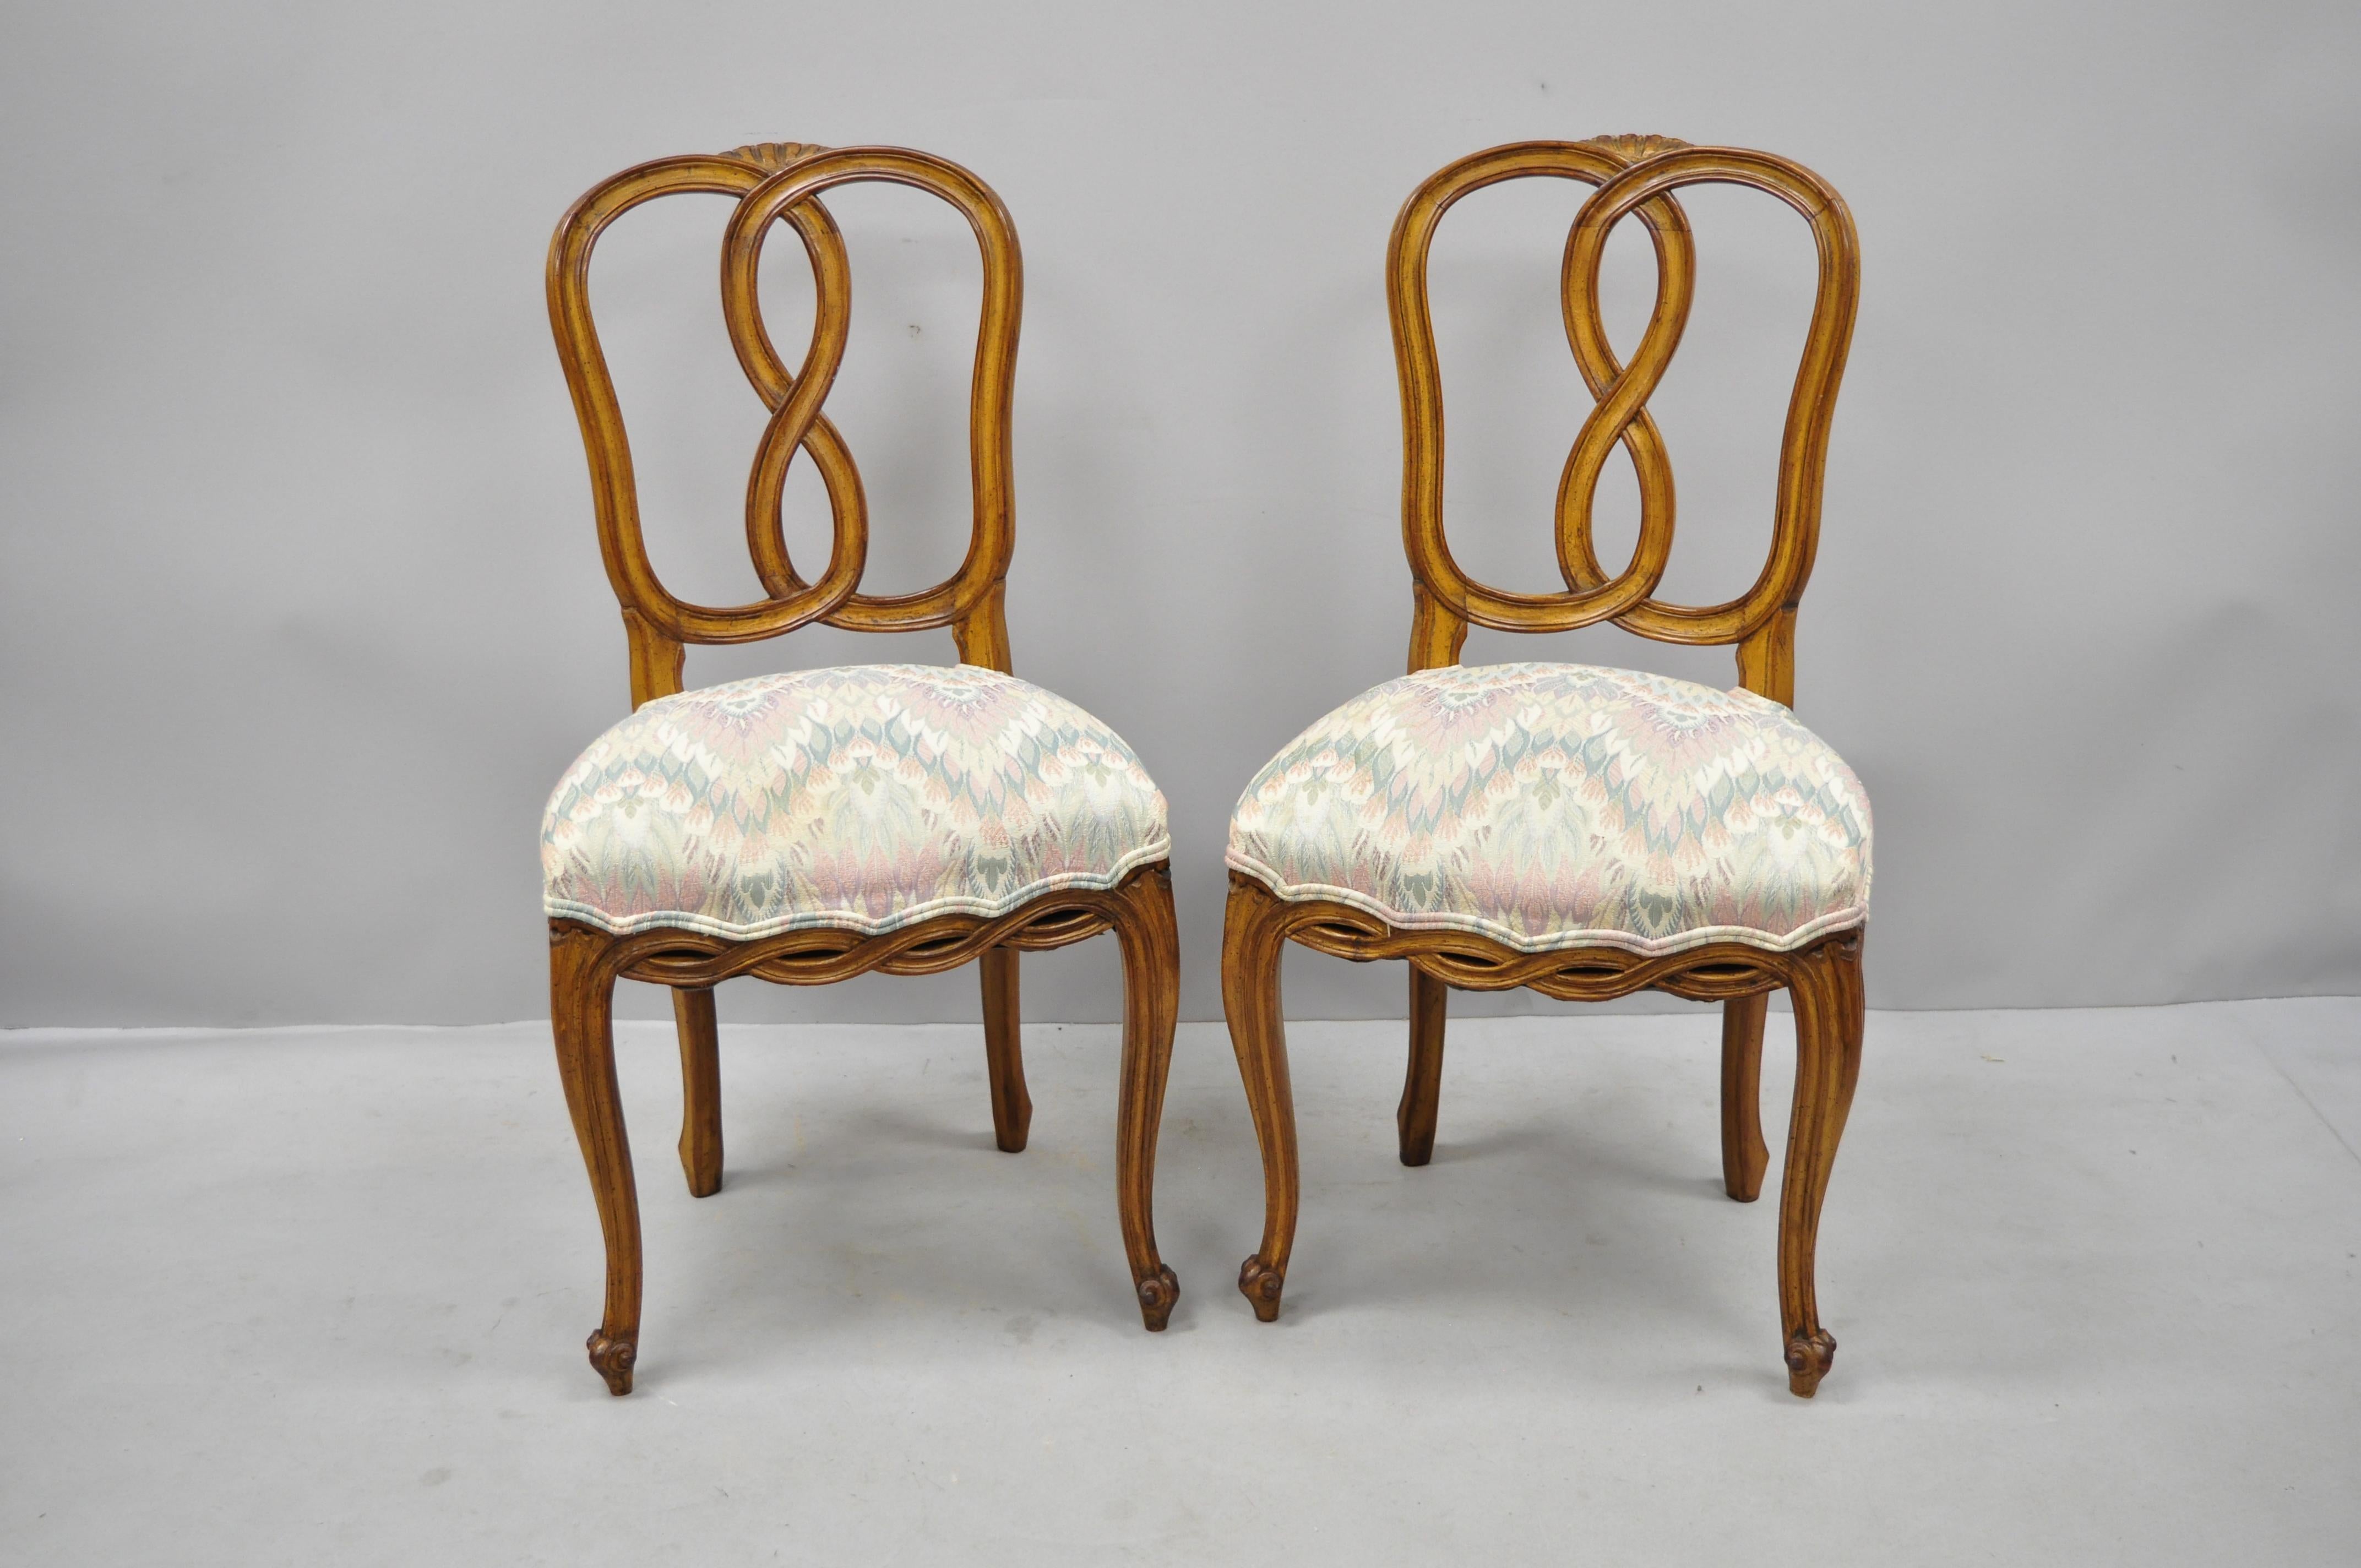 Set of 6 French Provincial style Pretzel back spiral carved dining chairs. Listing includes six side chairs, carved pretzel back, pierce spiral carved lower rails, solid wood construction, beautiful wood grain, cabriole legs, great style and form,